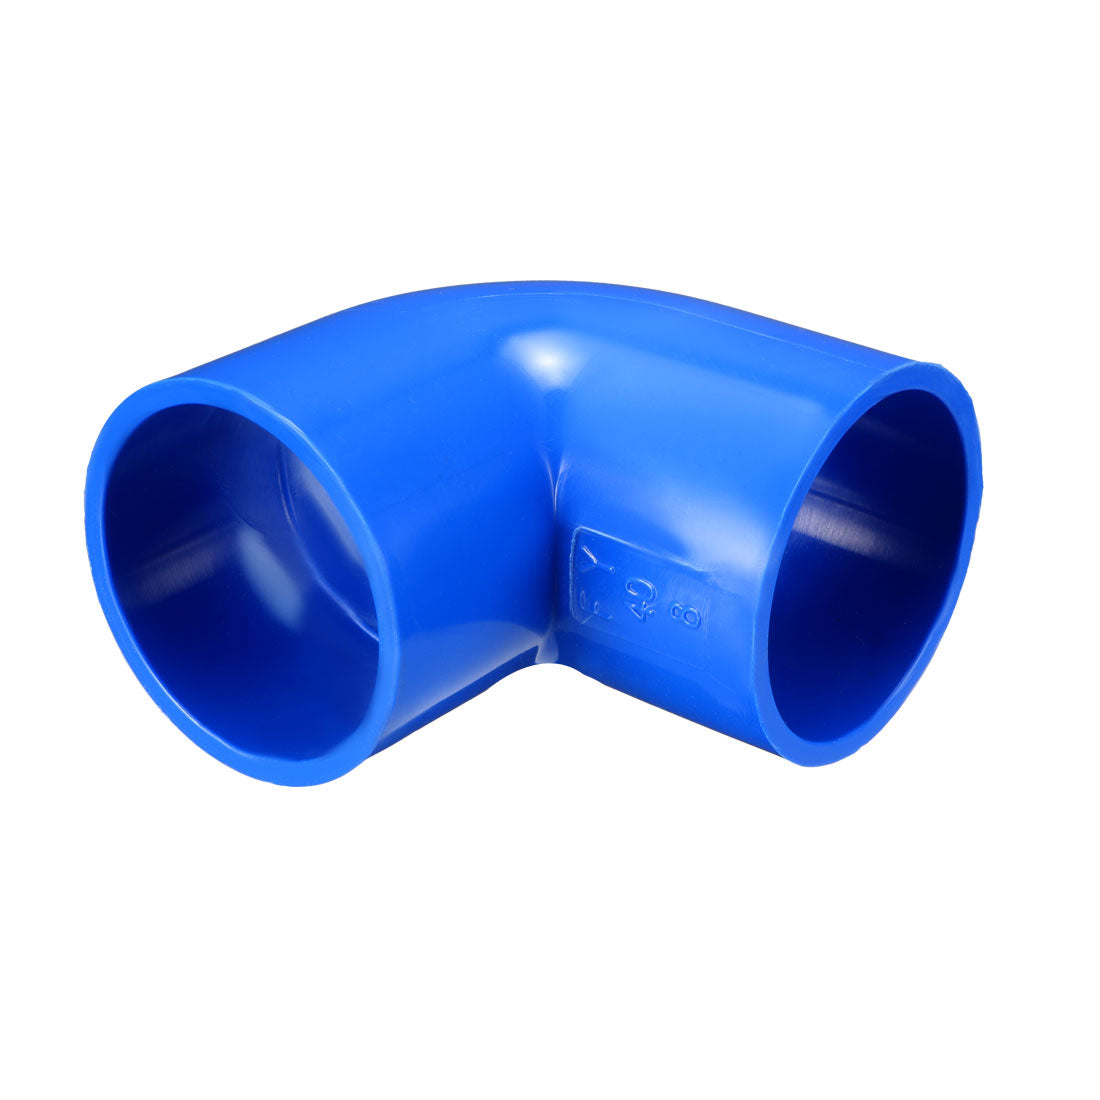 uxcell Uxcell 40mm Slip 90 Degree PVC Pipe Fitting Elbow Coupling Adapter Blue 2 Pcs